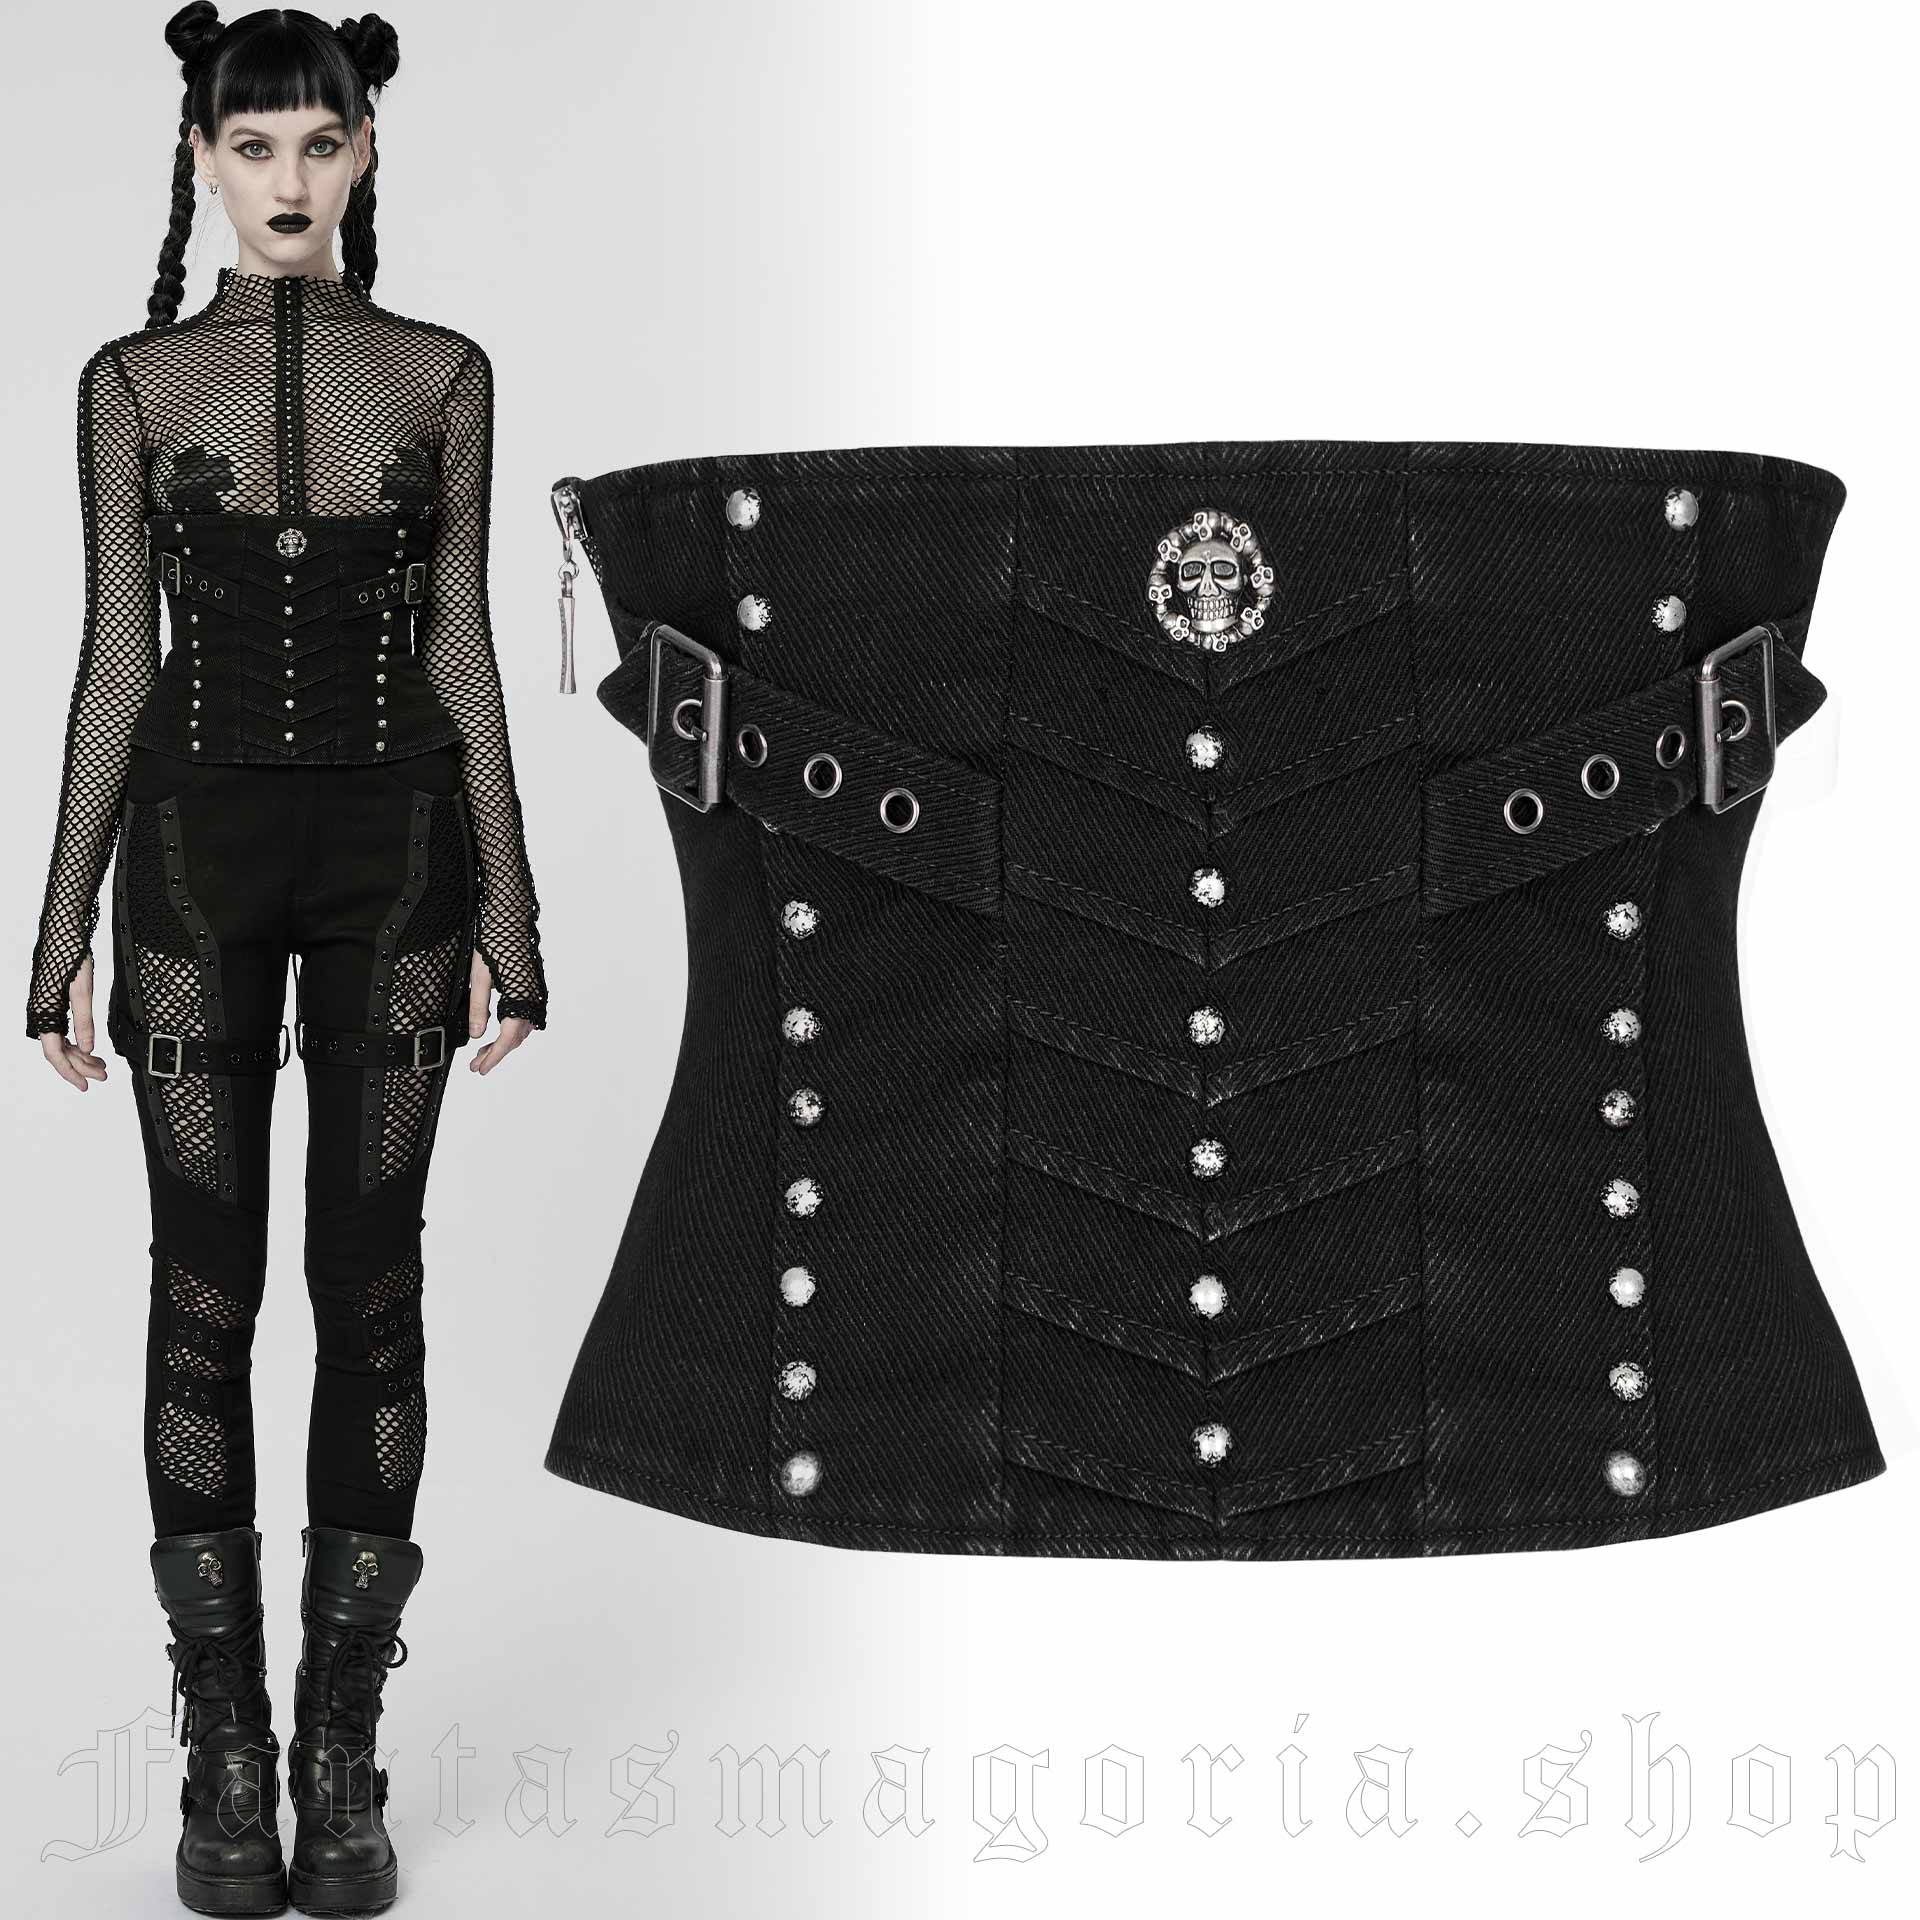 Large selection of women's metal corsets. All in stock. punk 